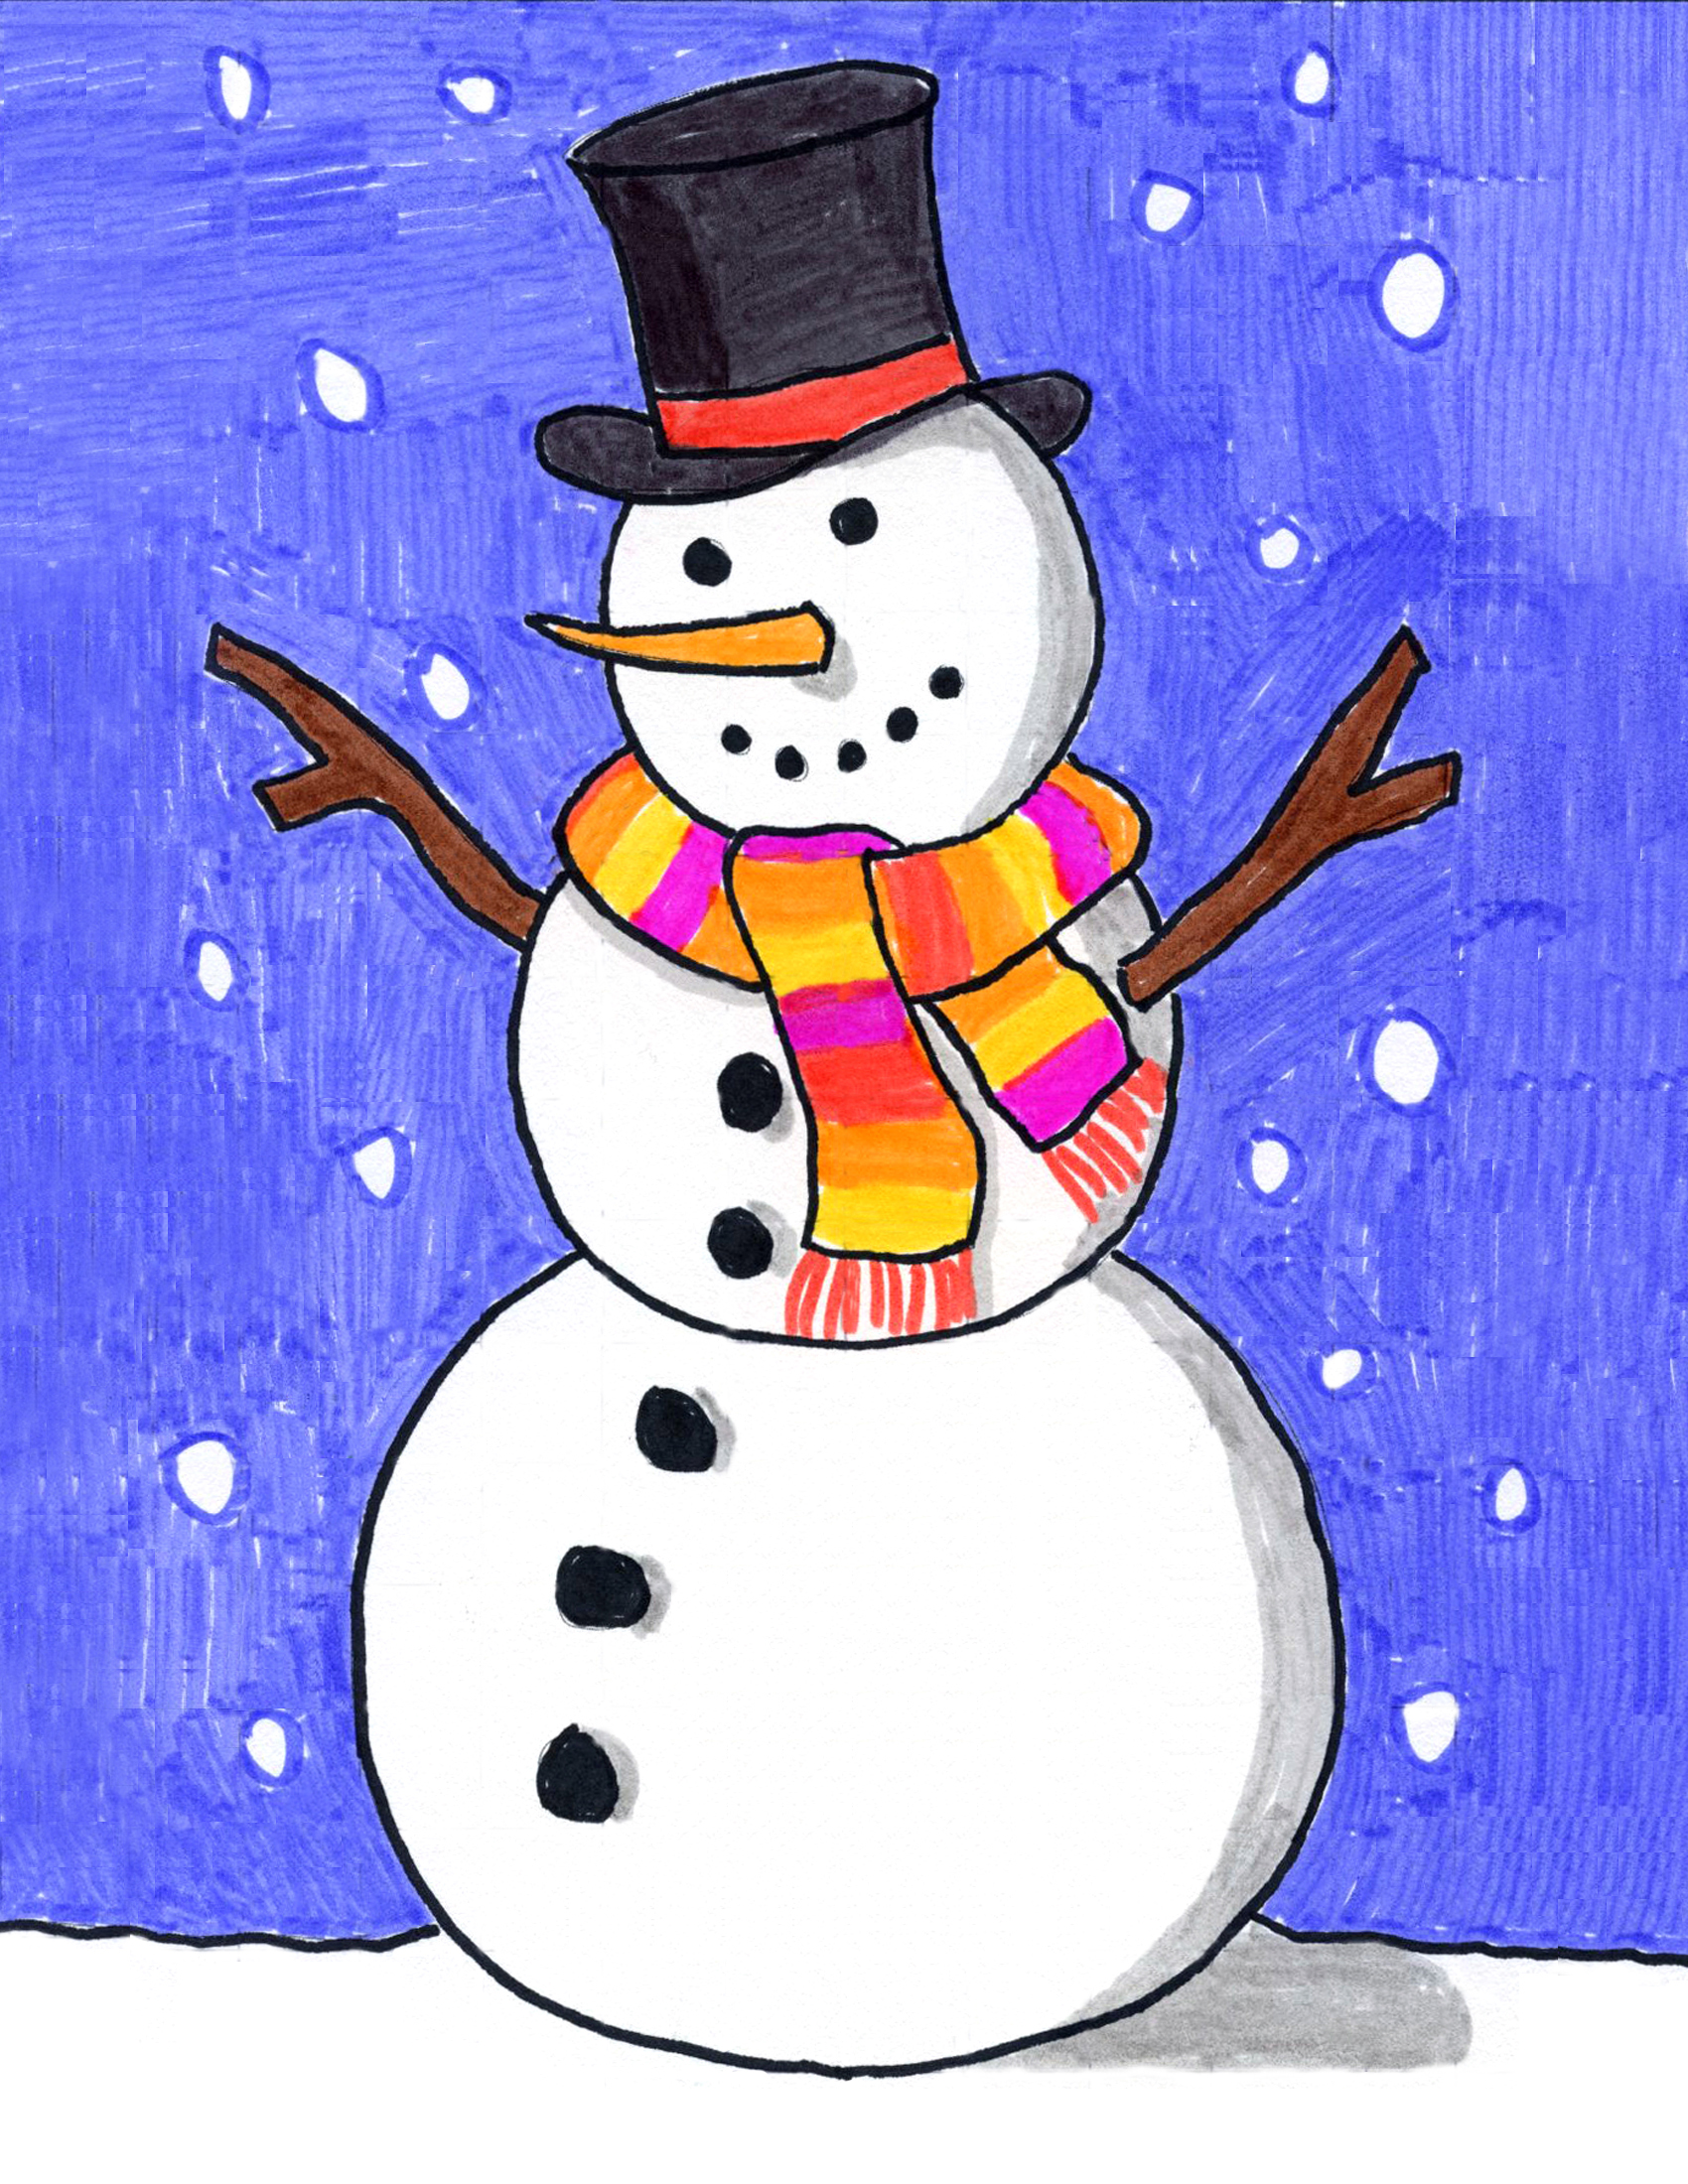 How To Draw A Snowman Art Projects For Kids